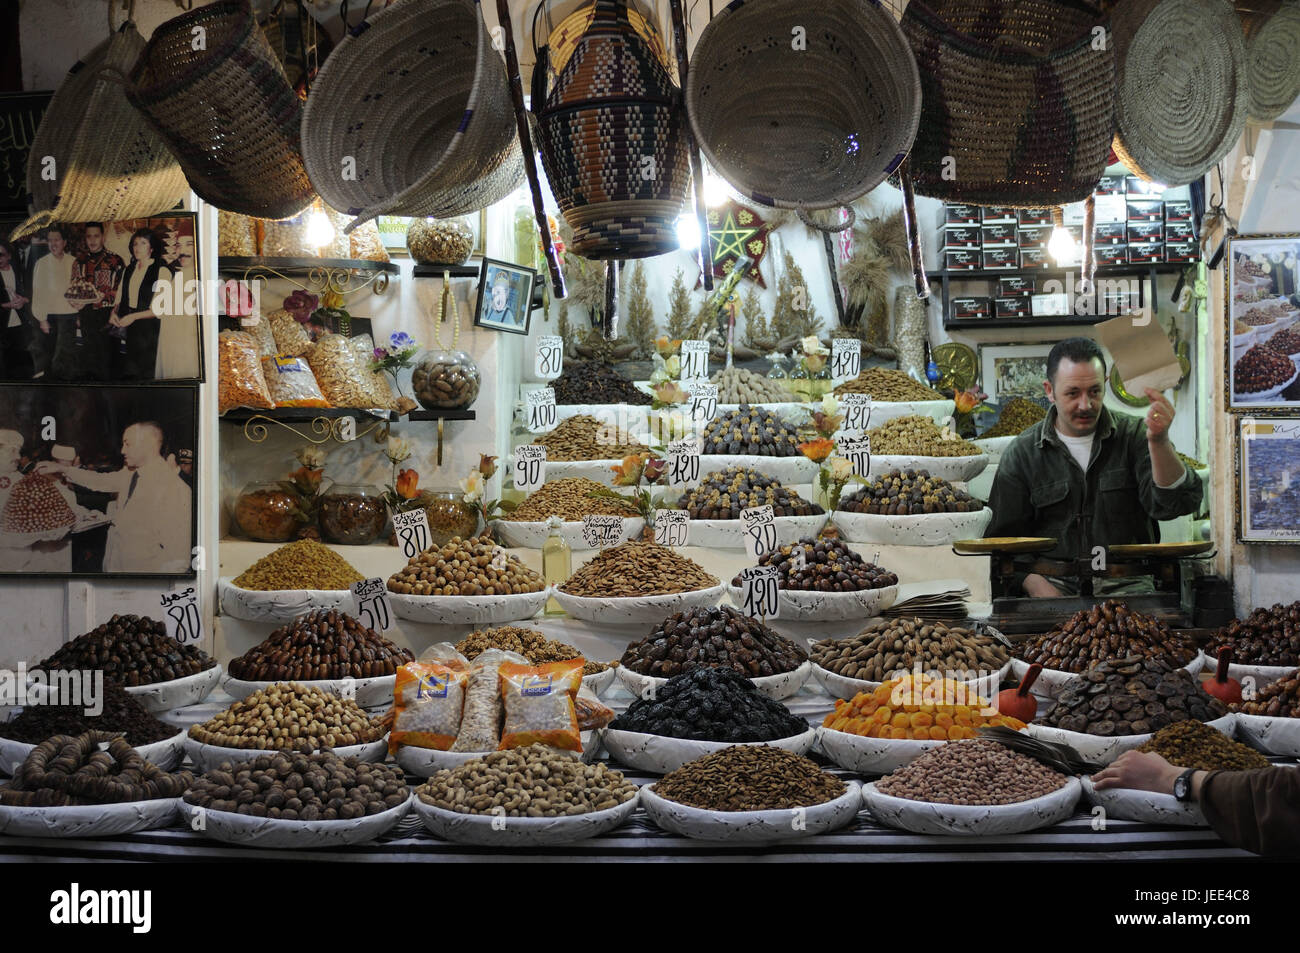 Market stall, dealer, food, sales, fez, Morocco, Africa, Stock Photo